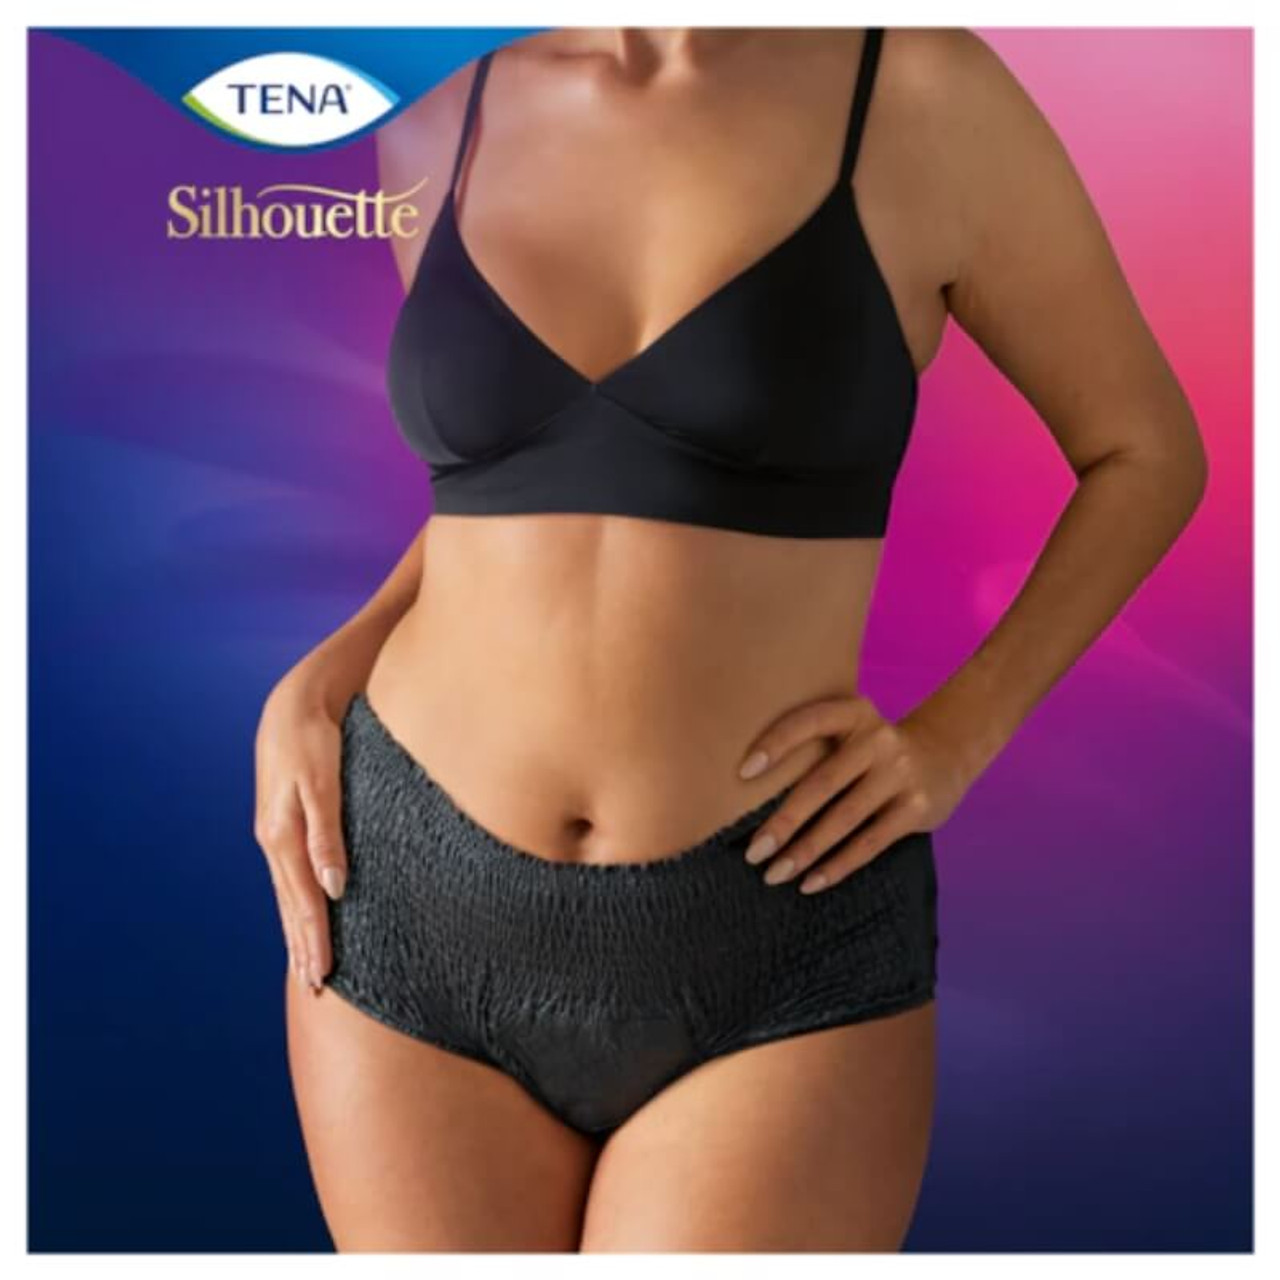 TENA Lady Silhouette - Plus - High Waist - Large - Pack of 8